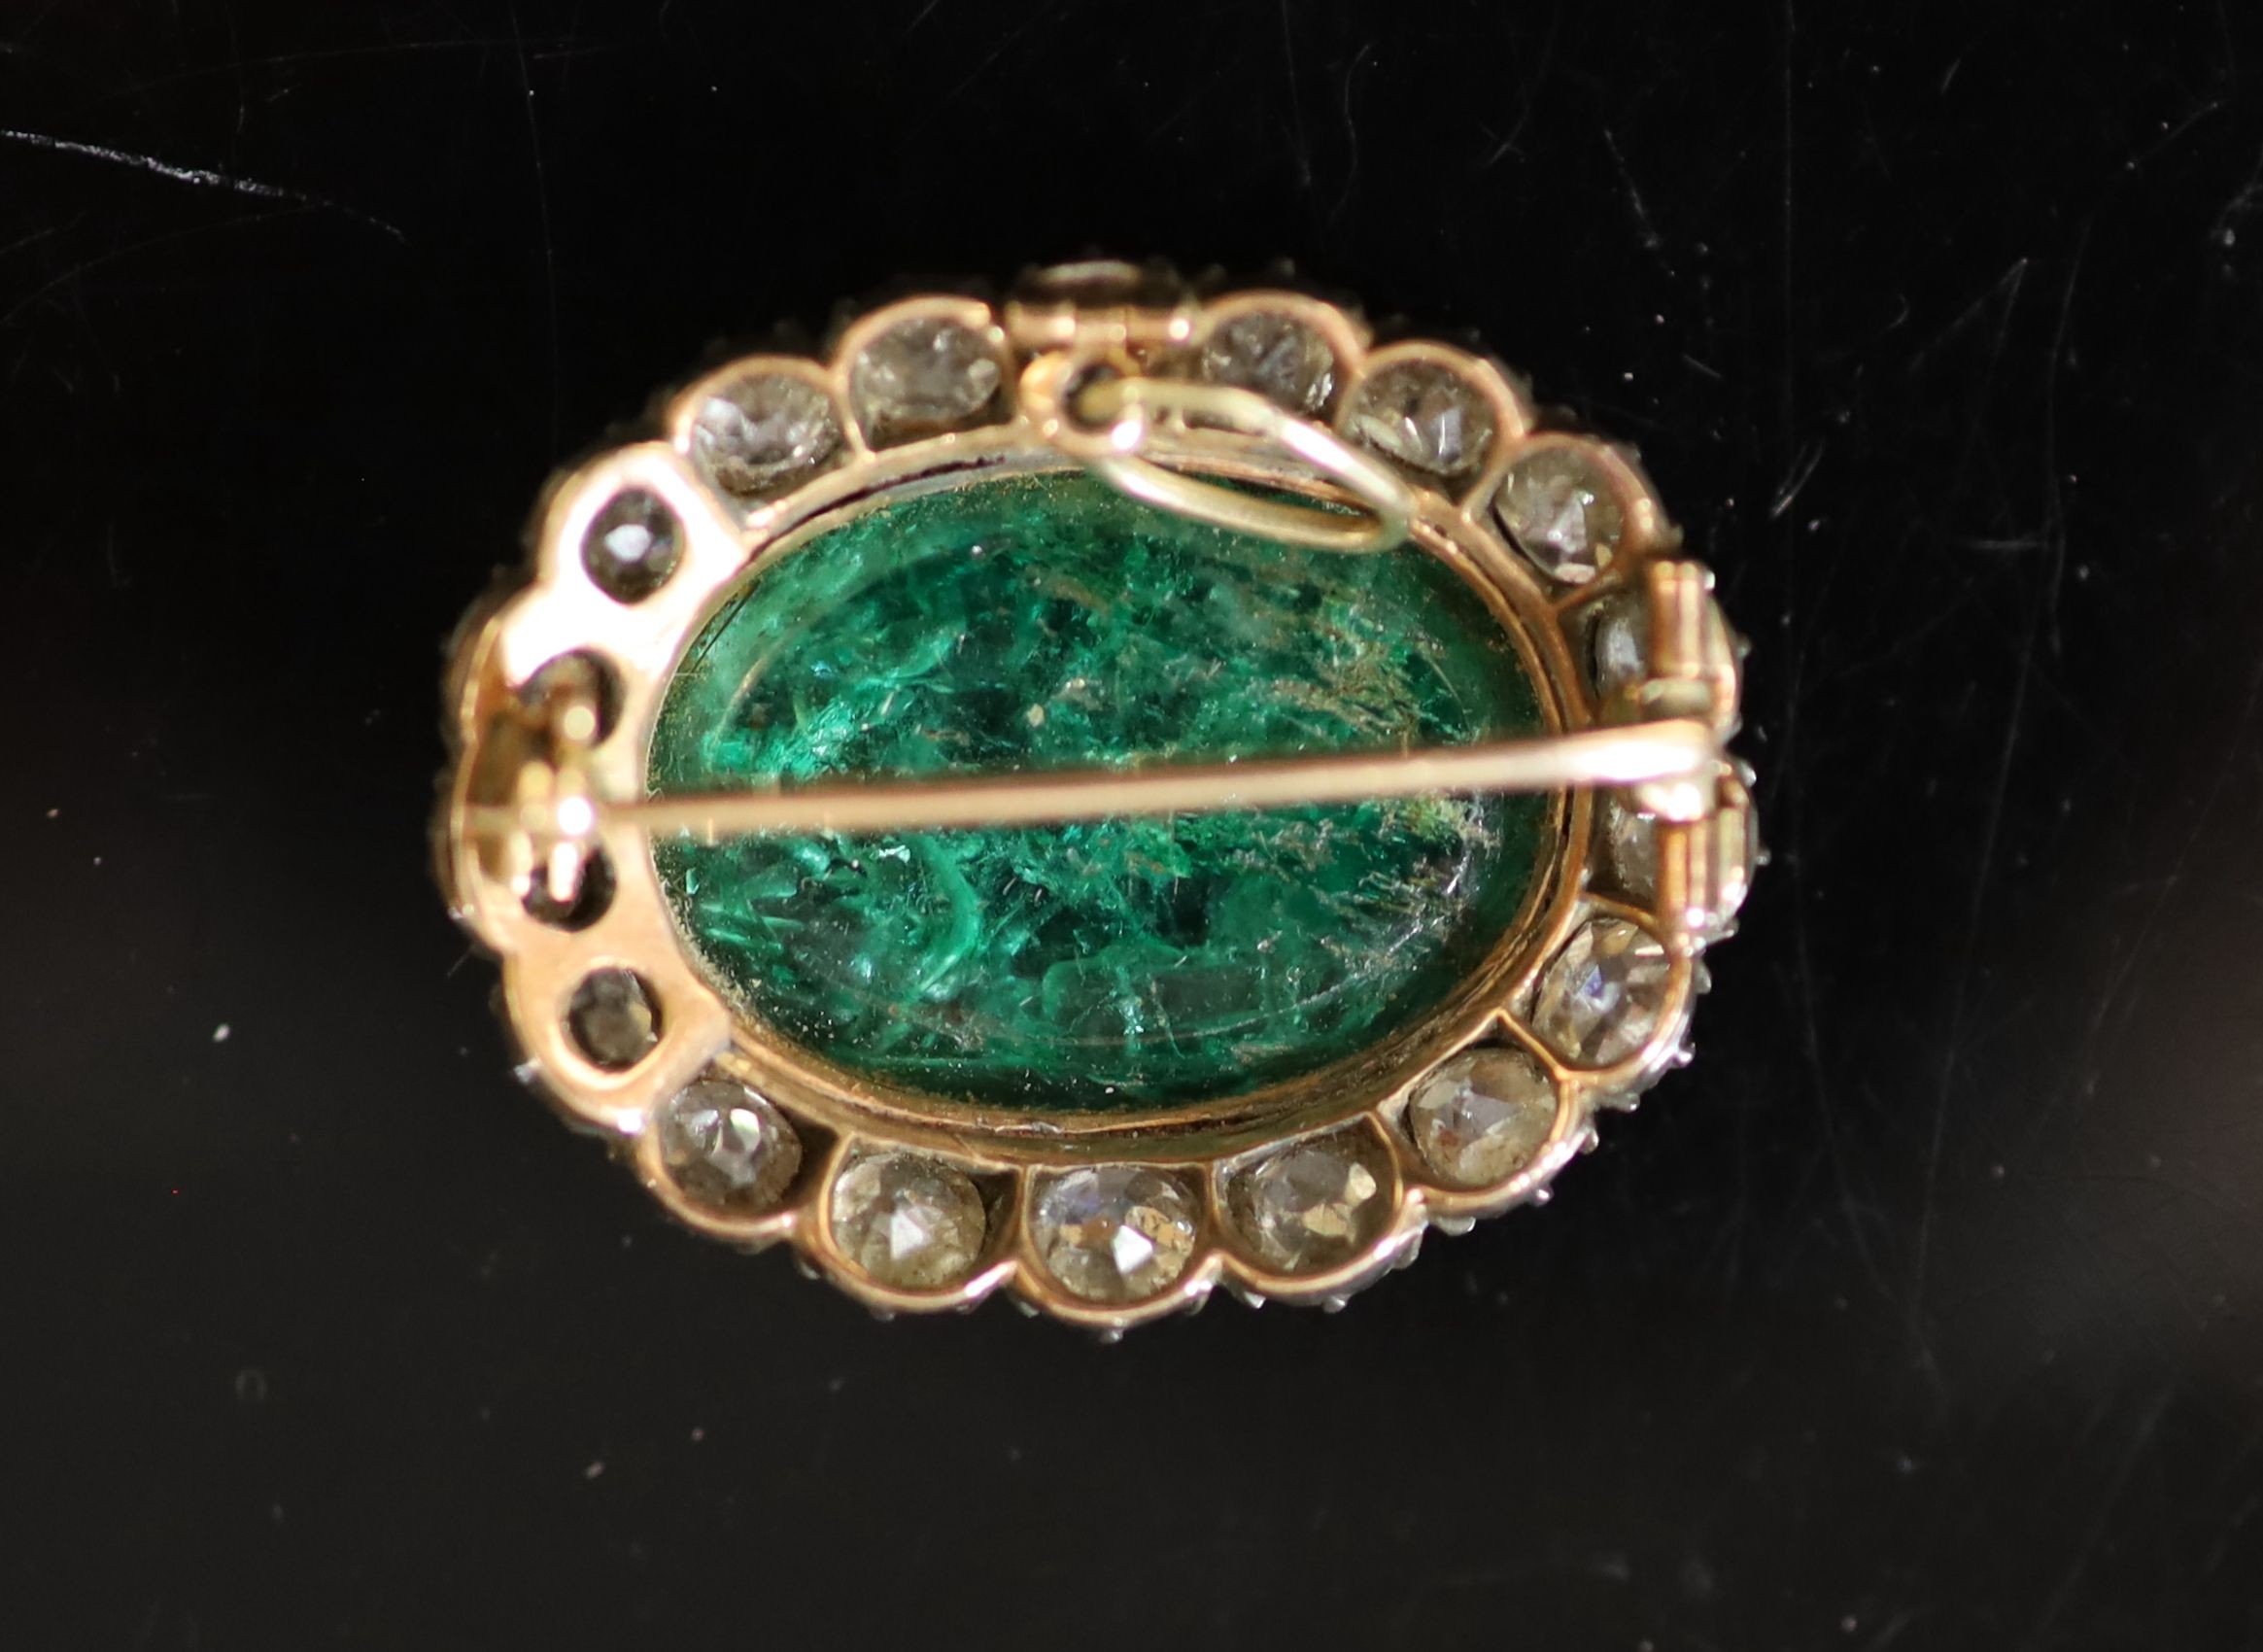 A possibly Roman oval intaglio emerald, mounted in an early Victorian gold, silver and diamond set oval pendant brooch